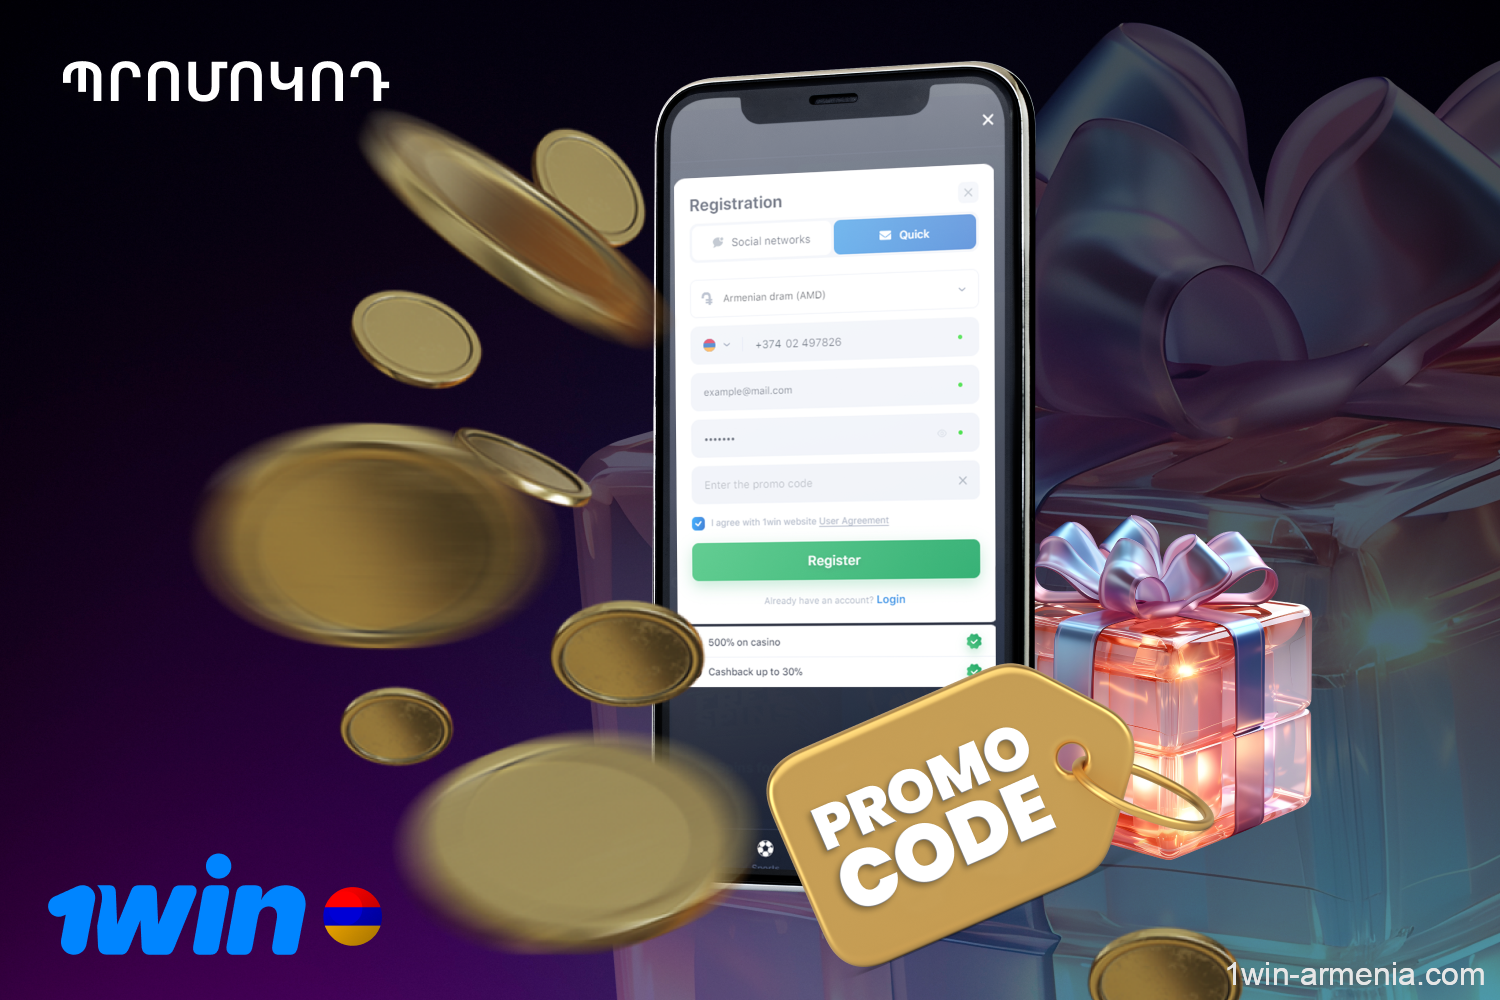 Users in Armenia can use a special 1win promo code that will allow them to get an additional bonus